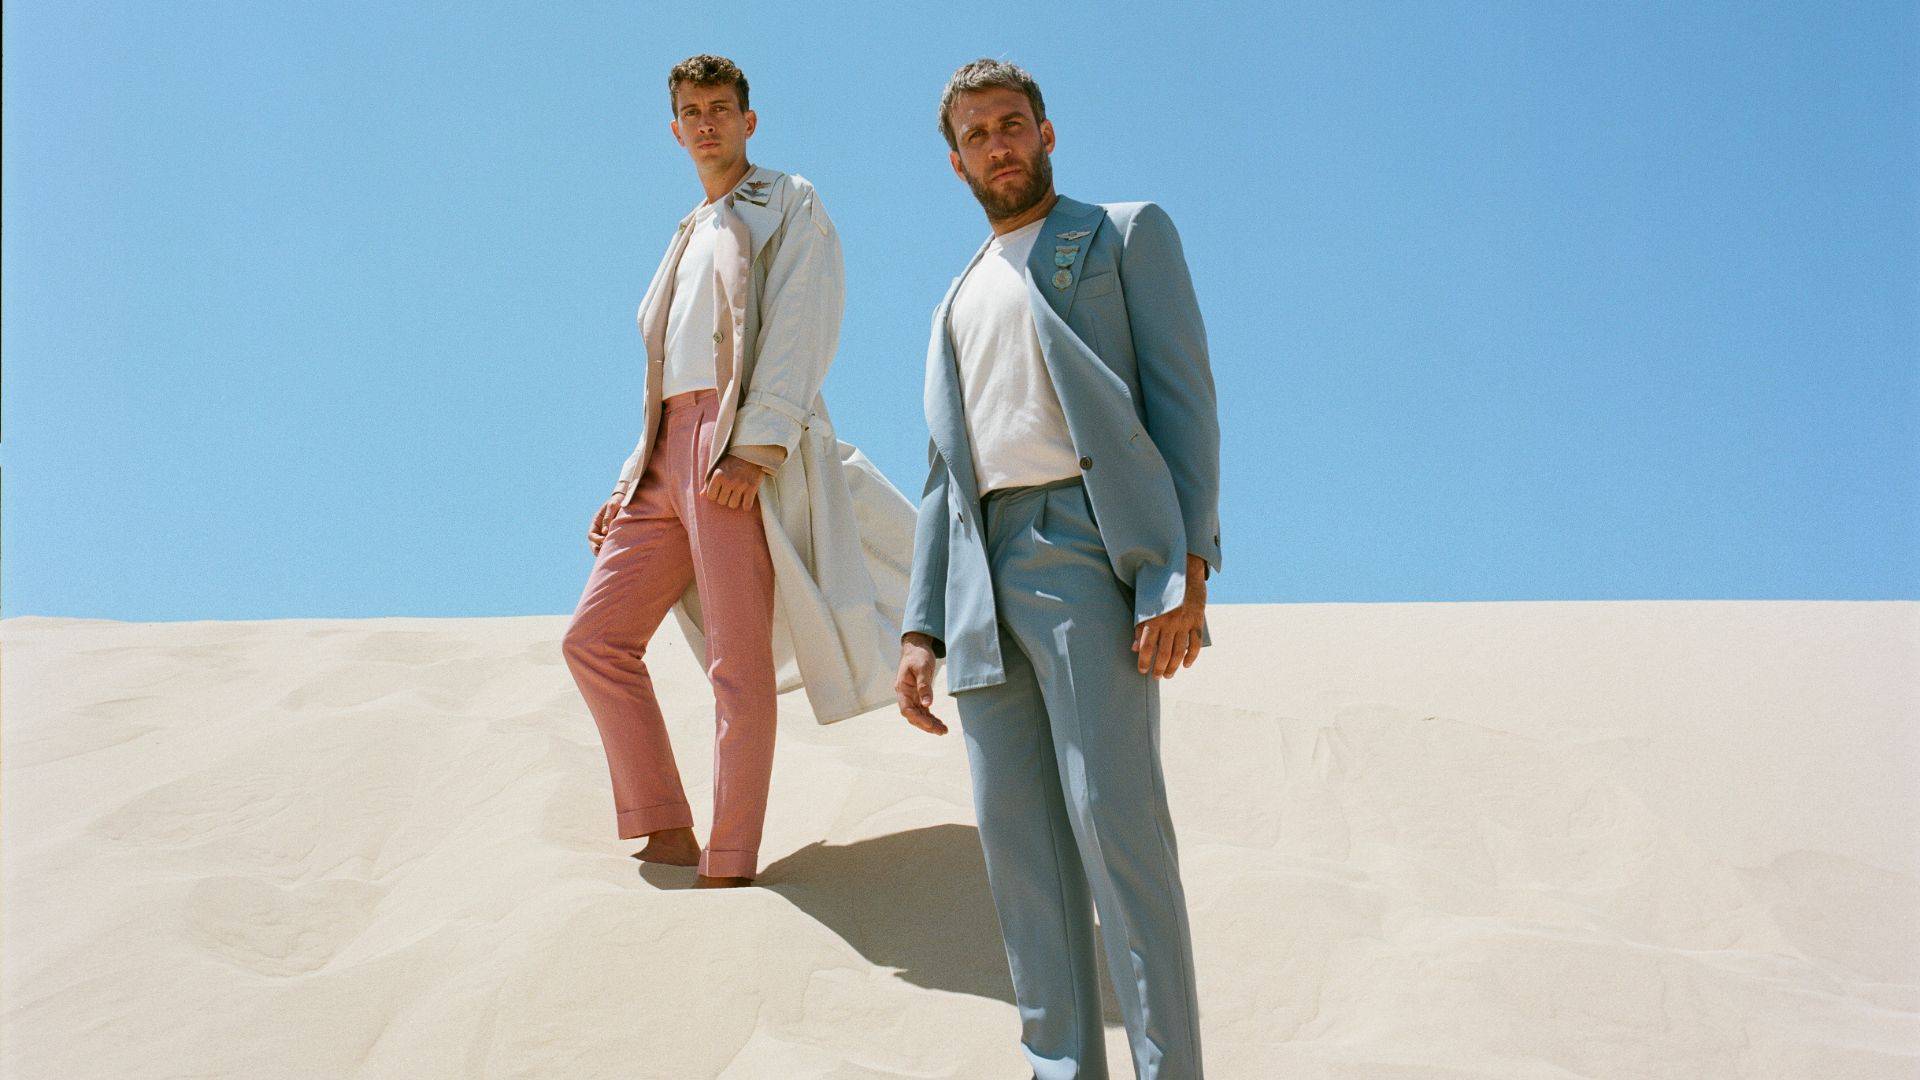 Flight Facilities interview in sand pastel outfits